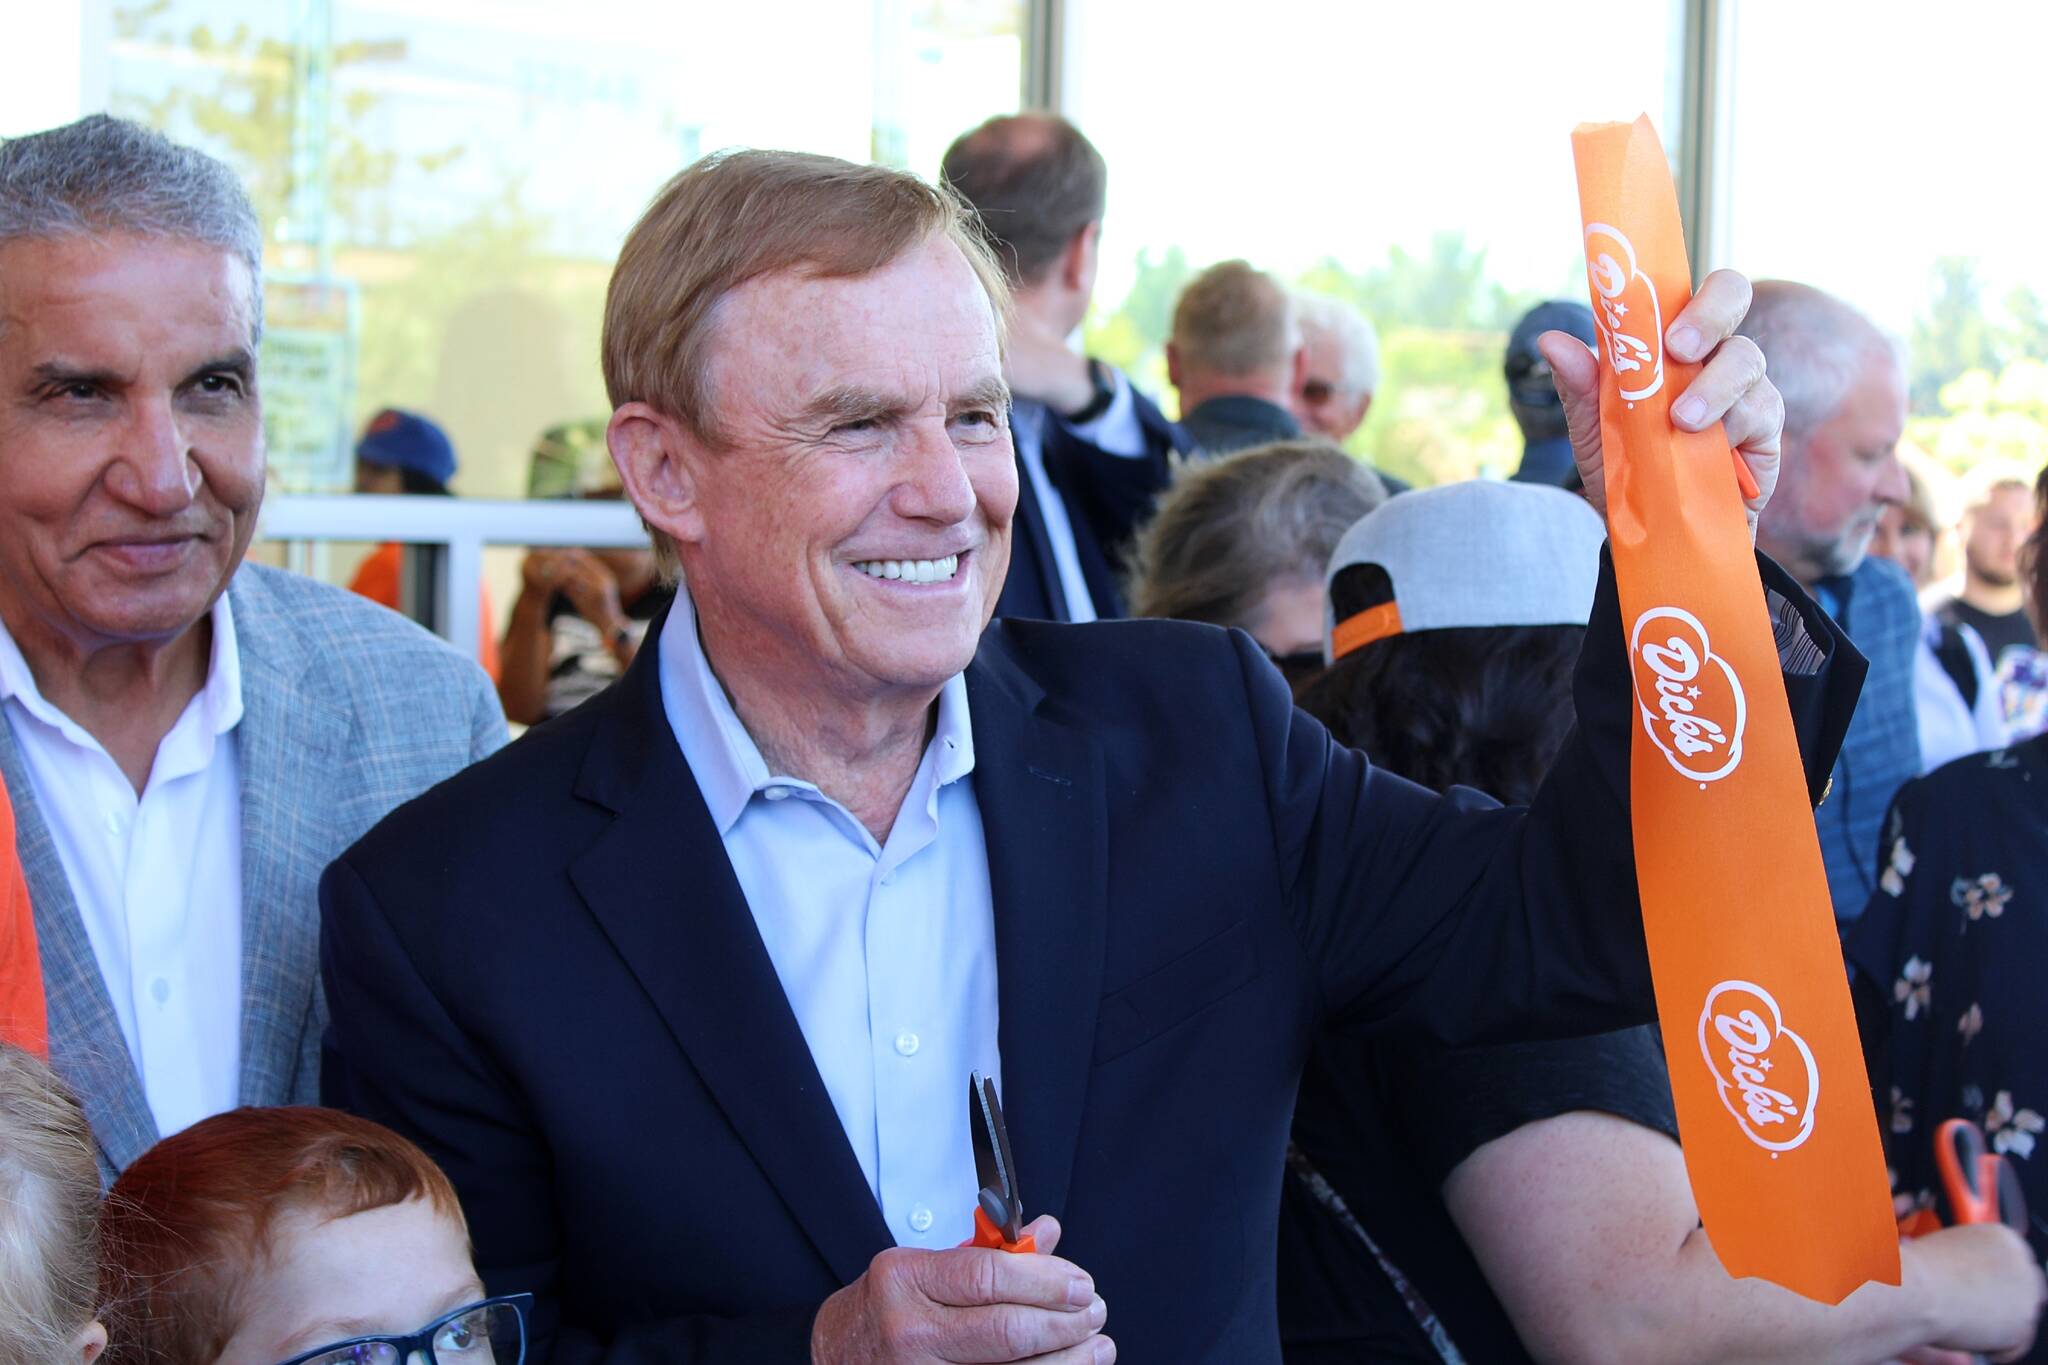 King County Councilmember Pete von Reichbauer holds a piece of the tape during the ribbon cutting for the new Federal Way Dick’s Drive-In. “This is a family operation committed to the local community,” von Reichbauer said. (Alex Bruell / The Mirror)